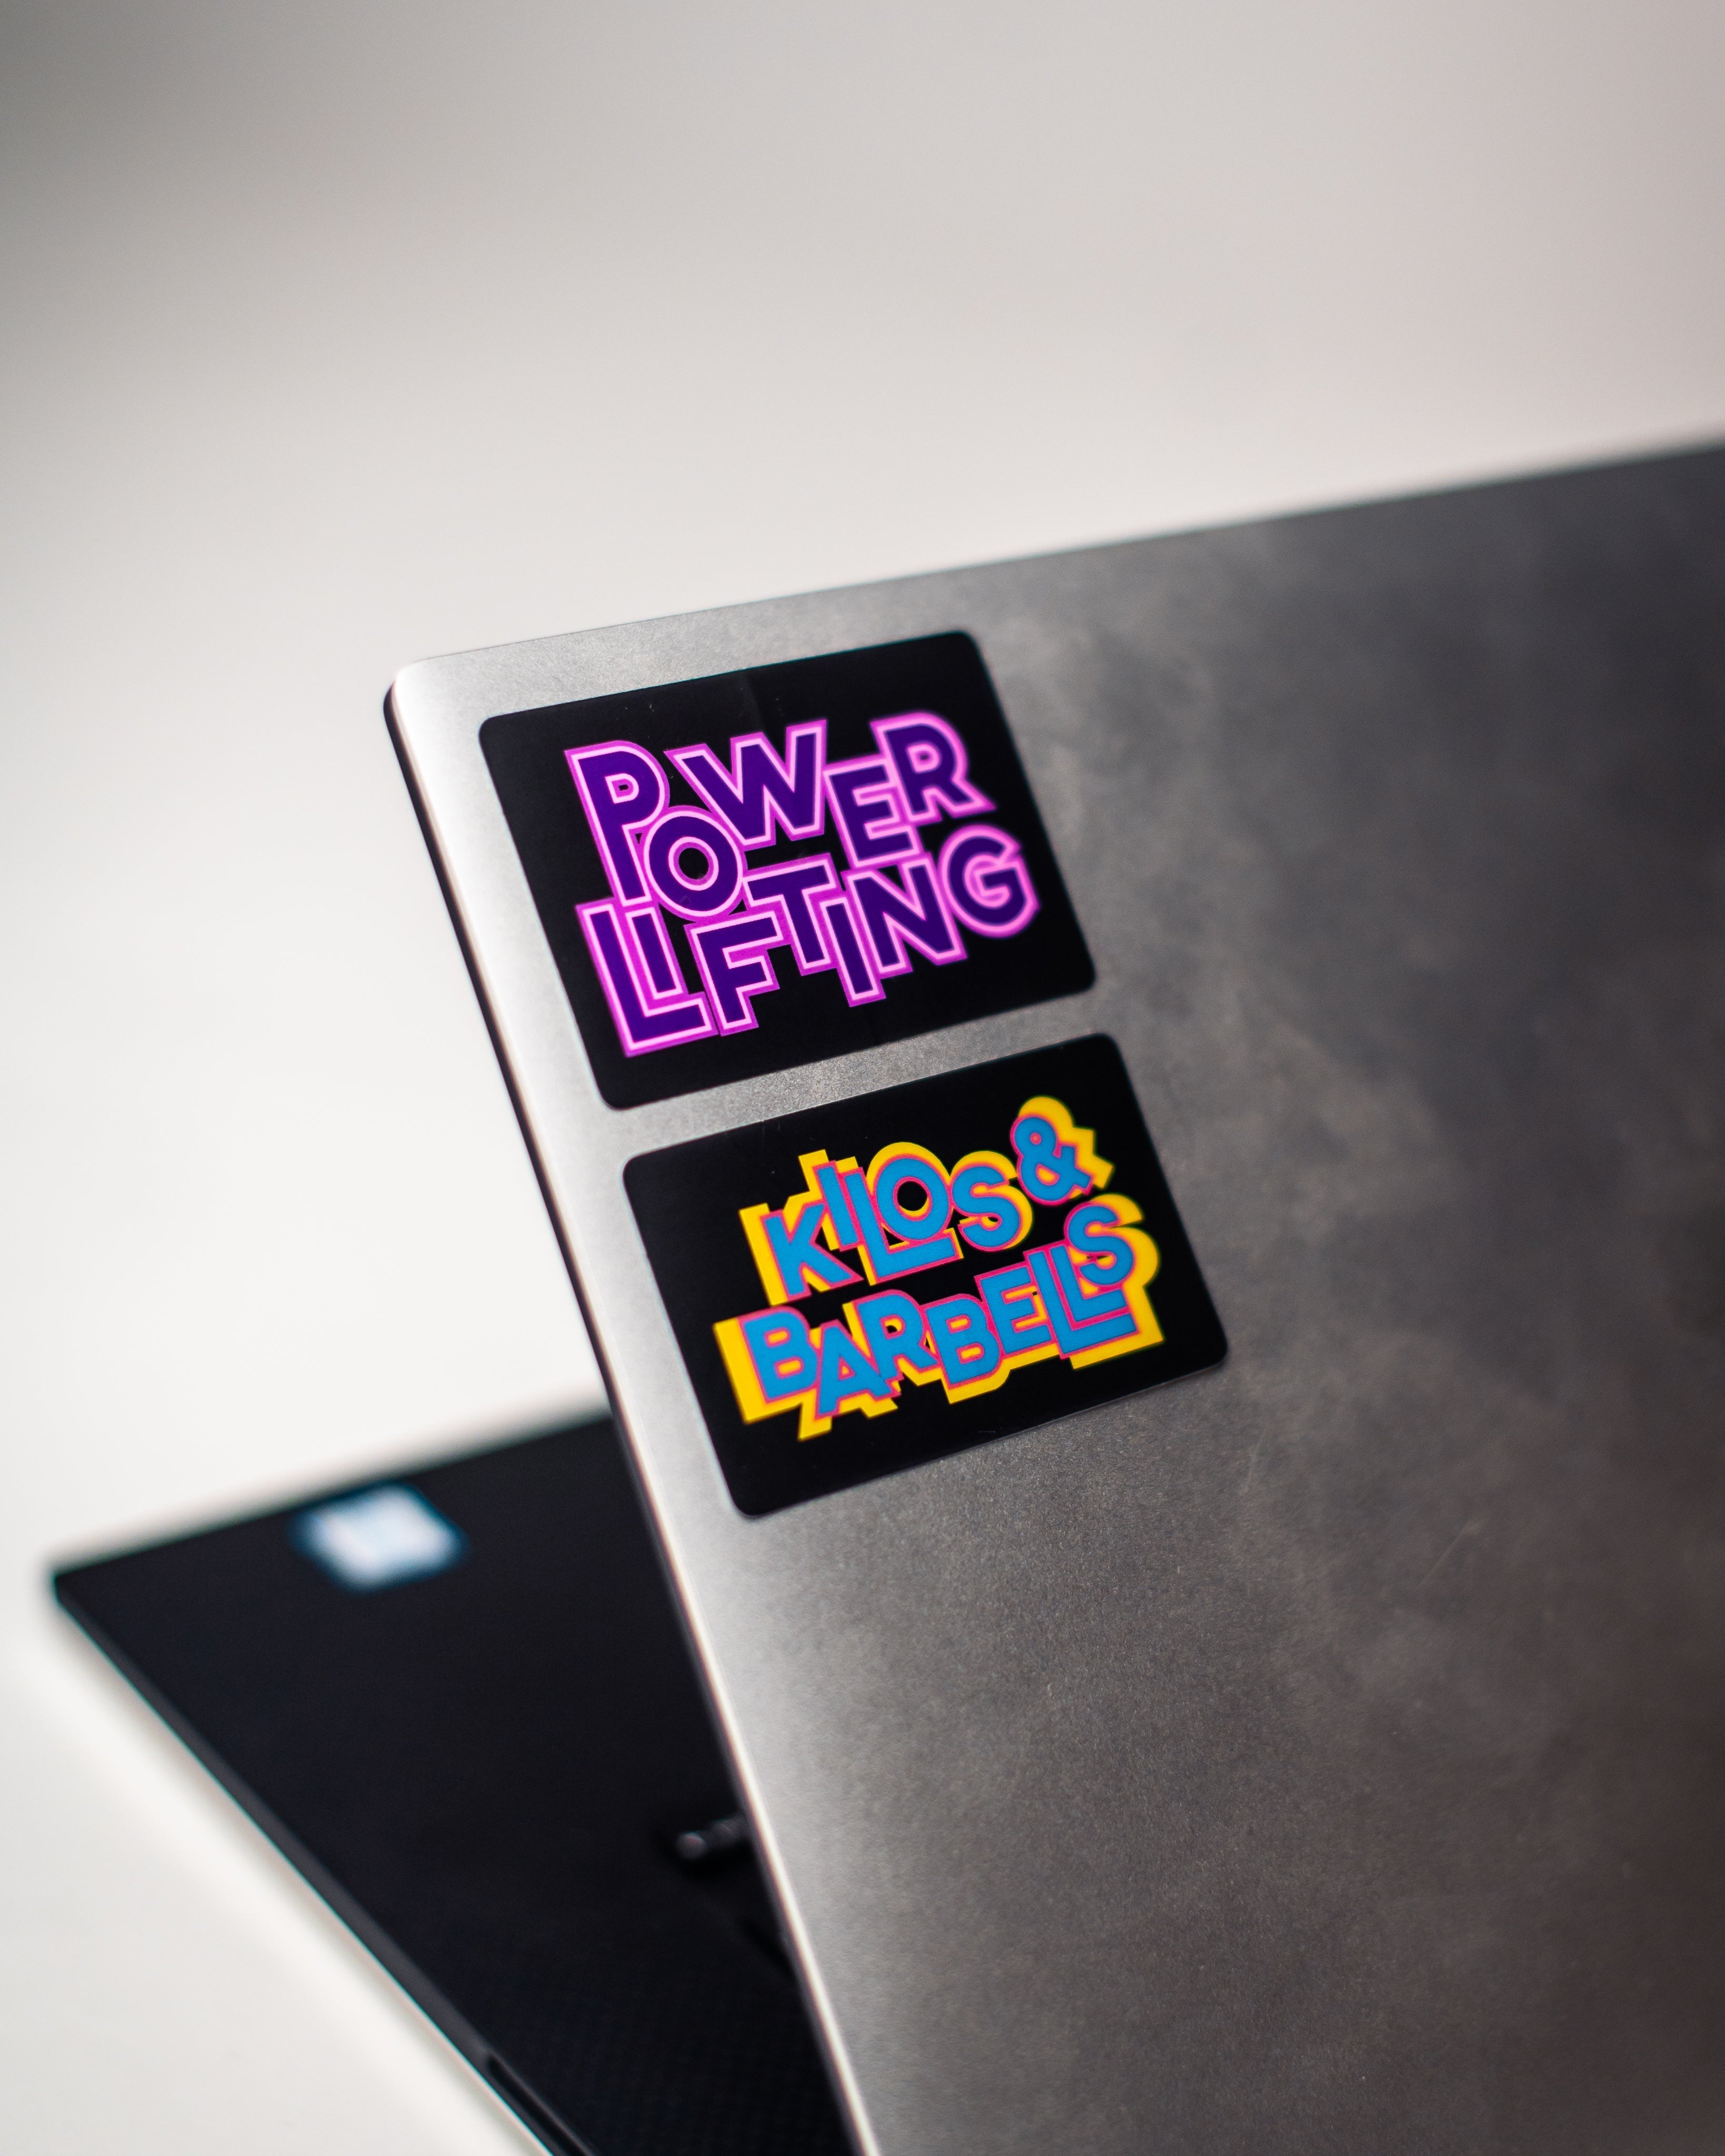 A7 Purple Power Sticker combines the dark with the fun and colourful designs to bring that pop of colour into the daily workouts. The sticker dye-cut, made from durable polypropylene and is 3 in wide x 2 in high. Purchase Purple Power sticker from A7 UK.